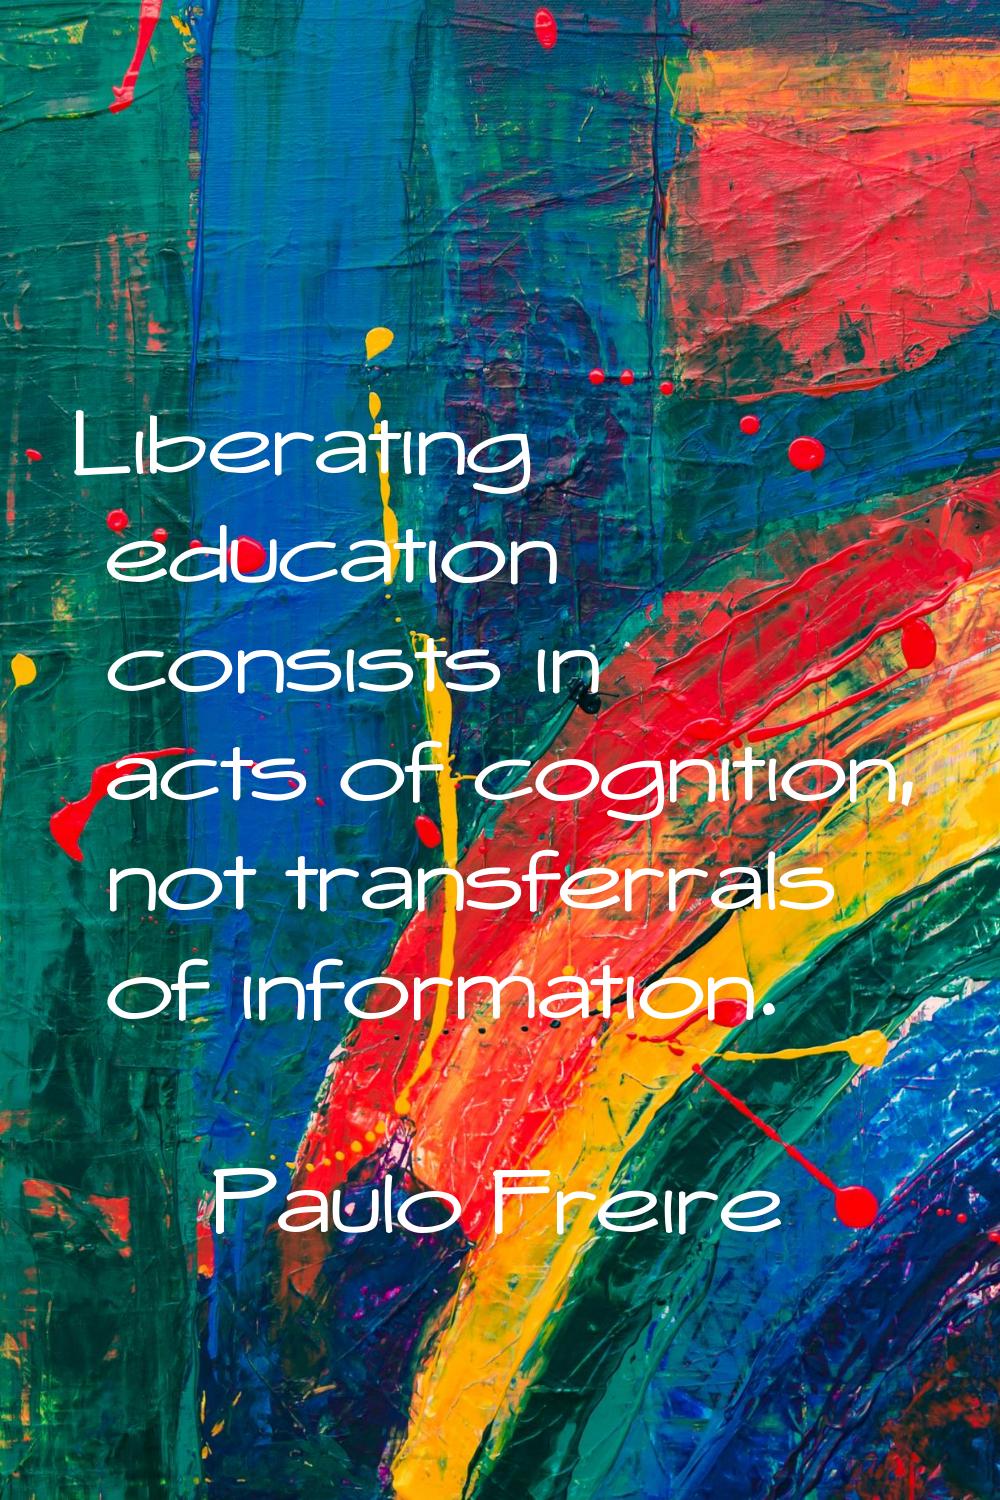 Liberating education consists in acts of cognition, not transferrals of information.